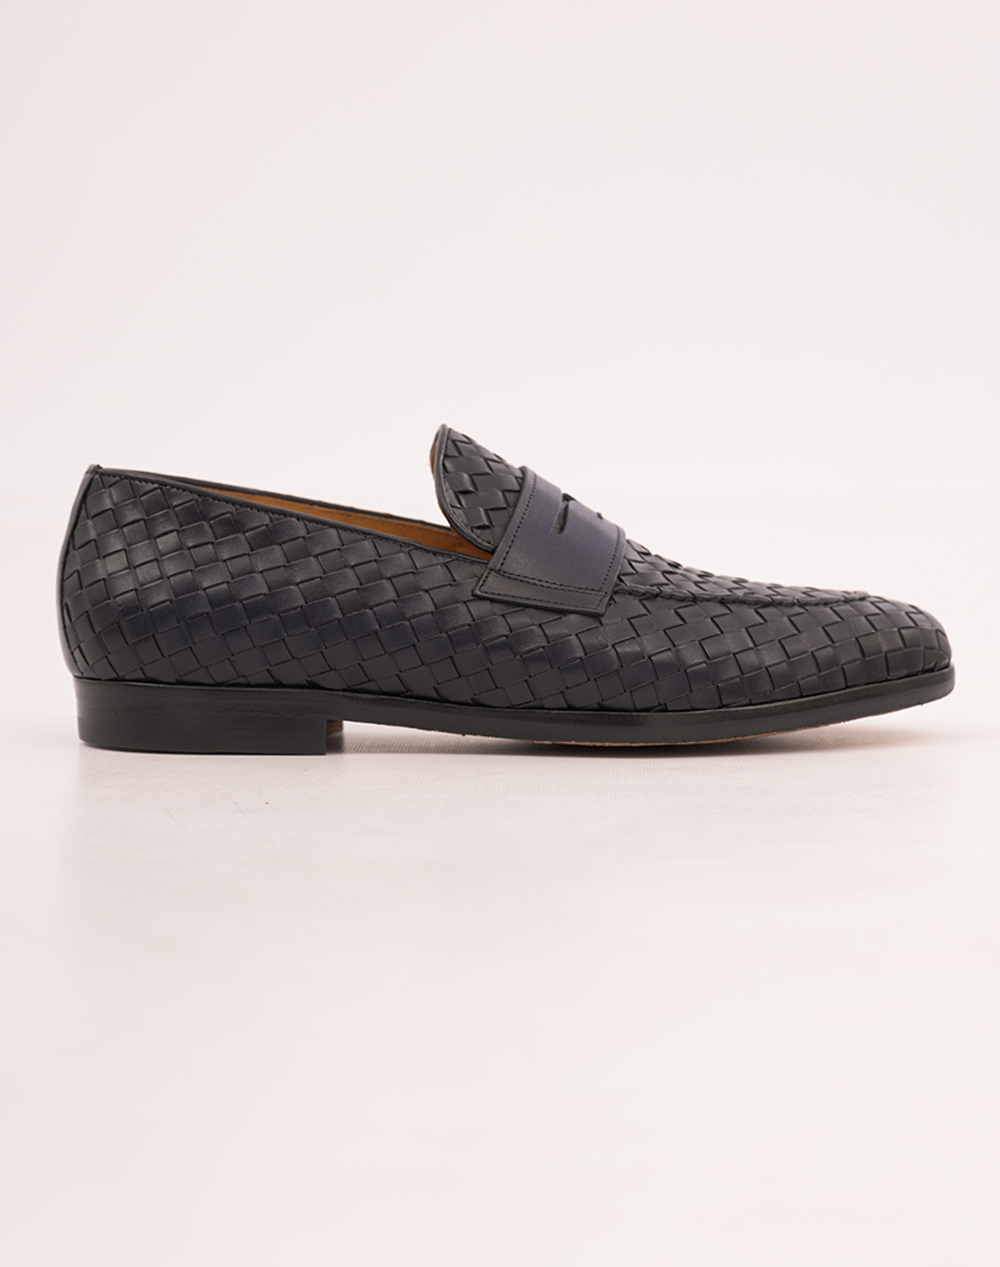 JUAN LACARCEL CALCE LOAFERS X1677-NAVY BLUE NavyBlue